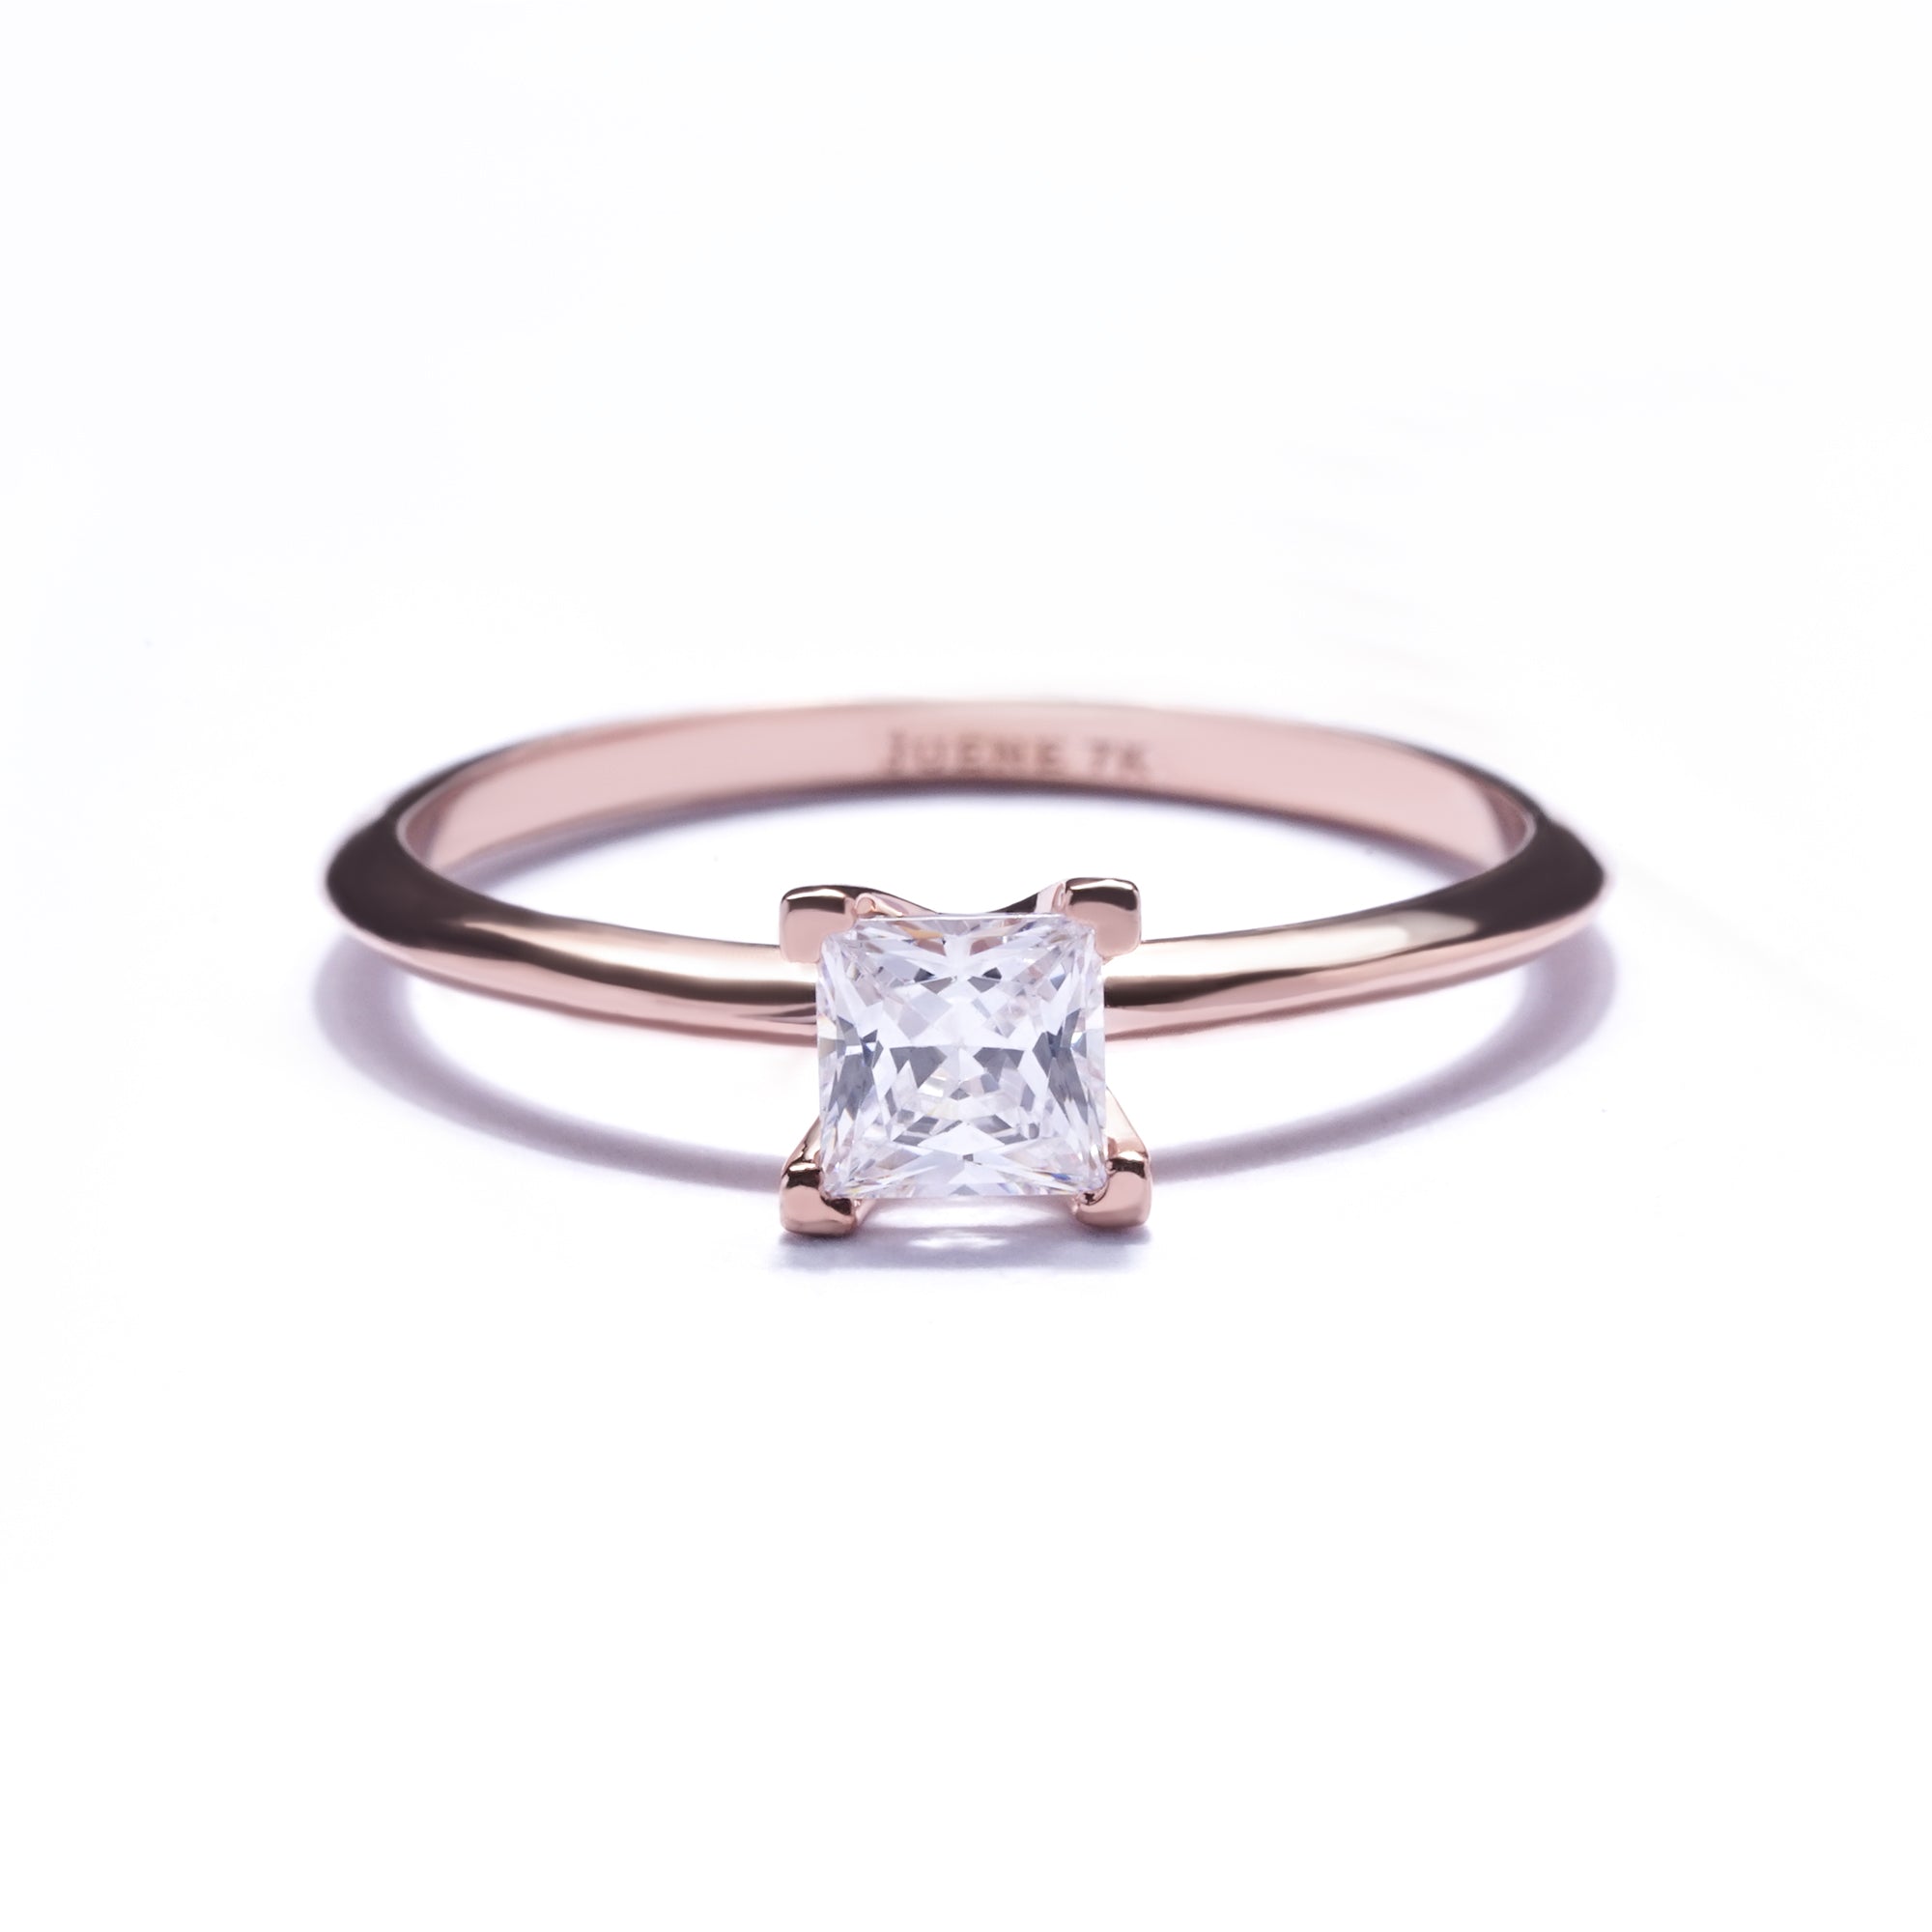 Lia Gold Ring - Dazzling Juene Collection - Juene Jewelry